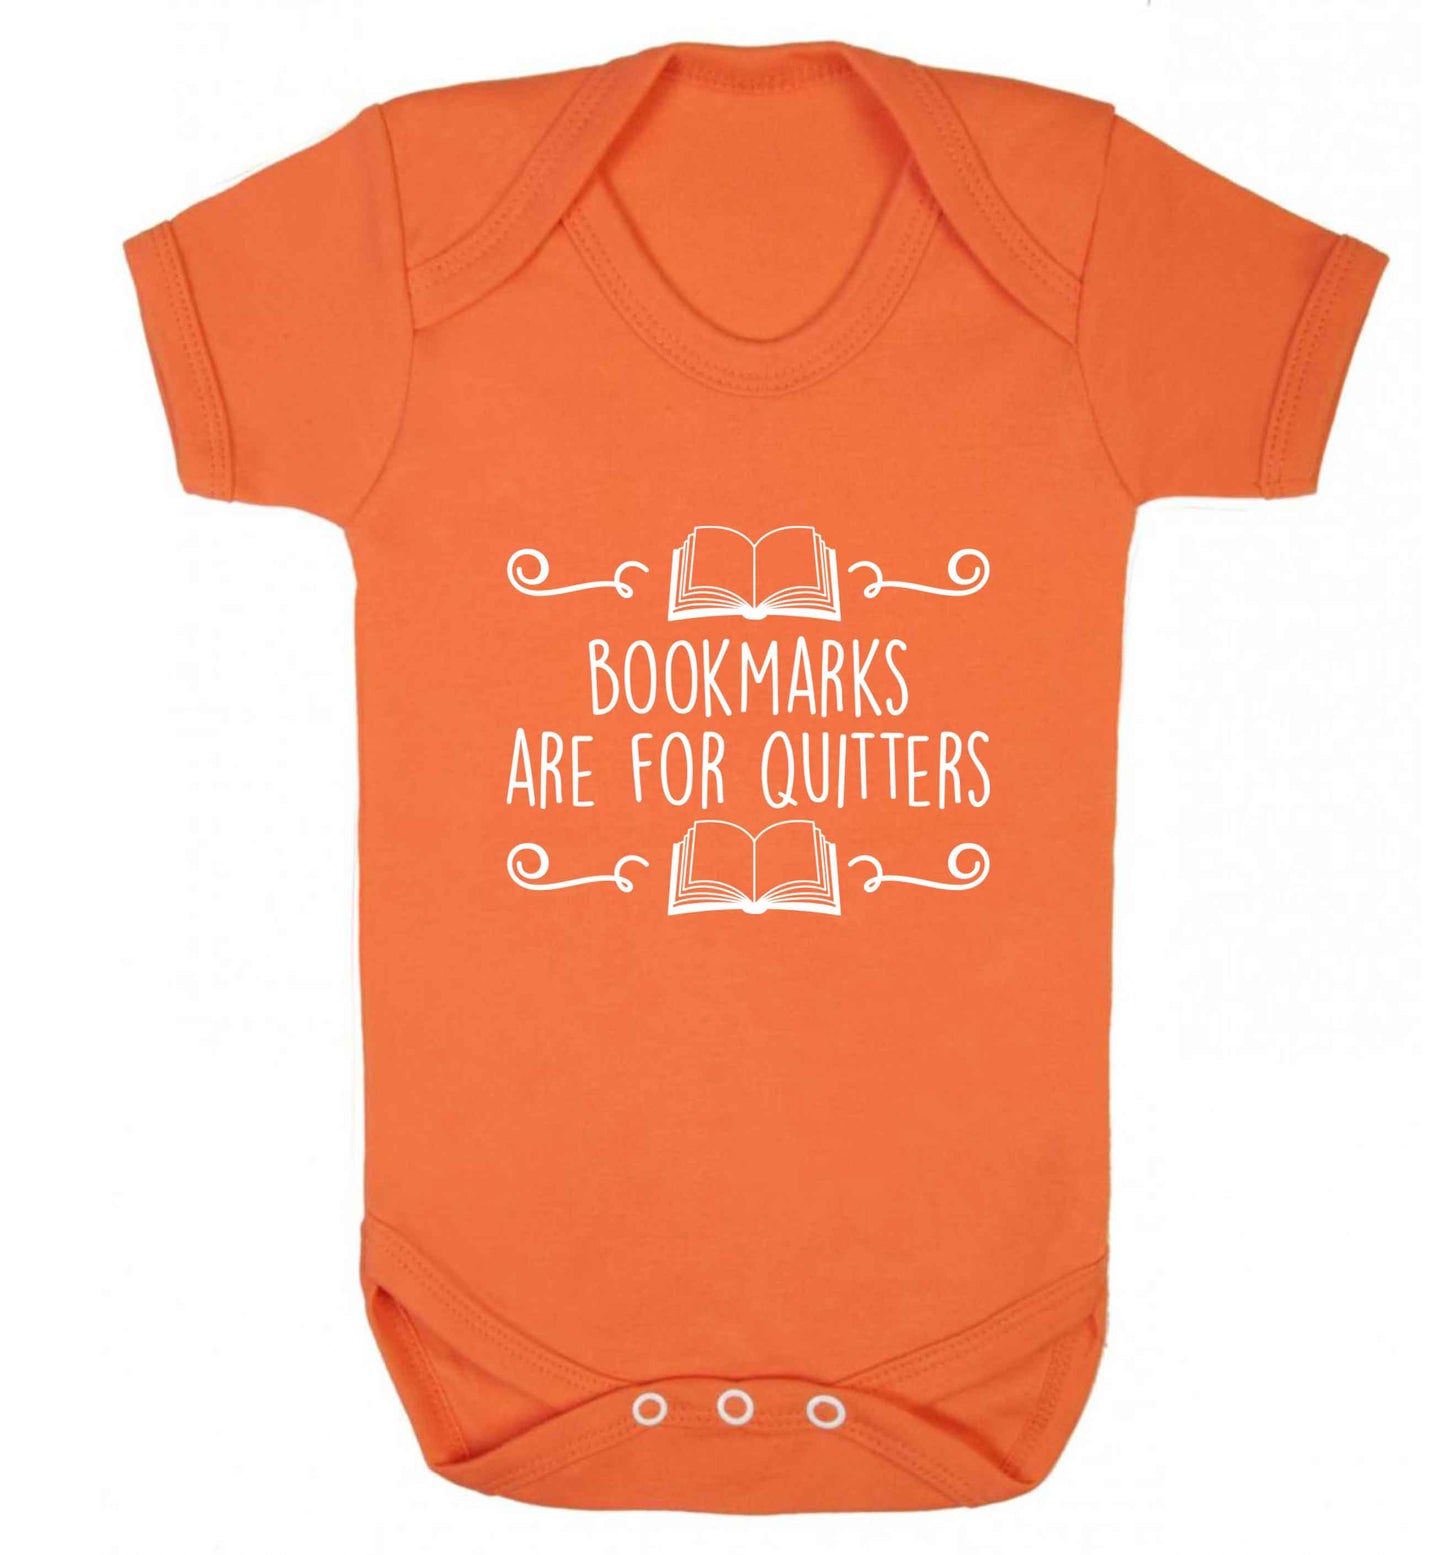 Bookmarks are for quitters baby vest orange 18-24 months